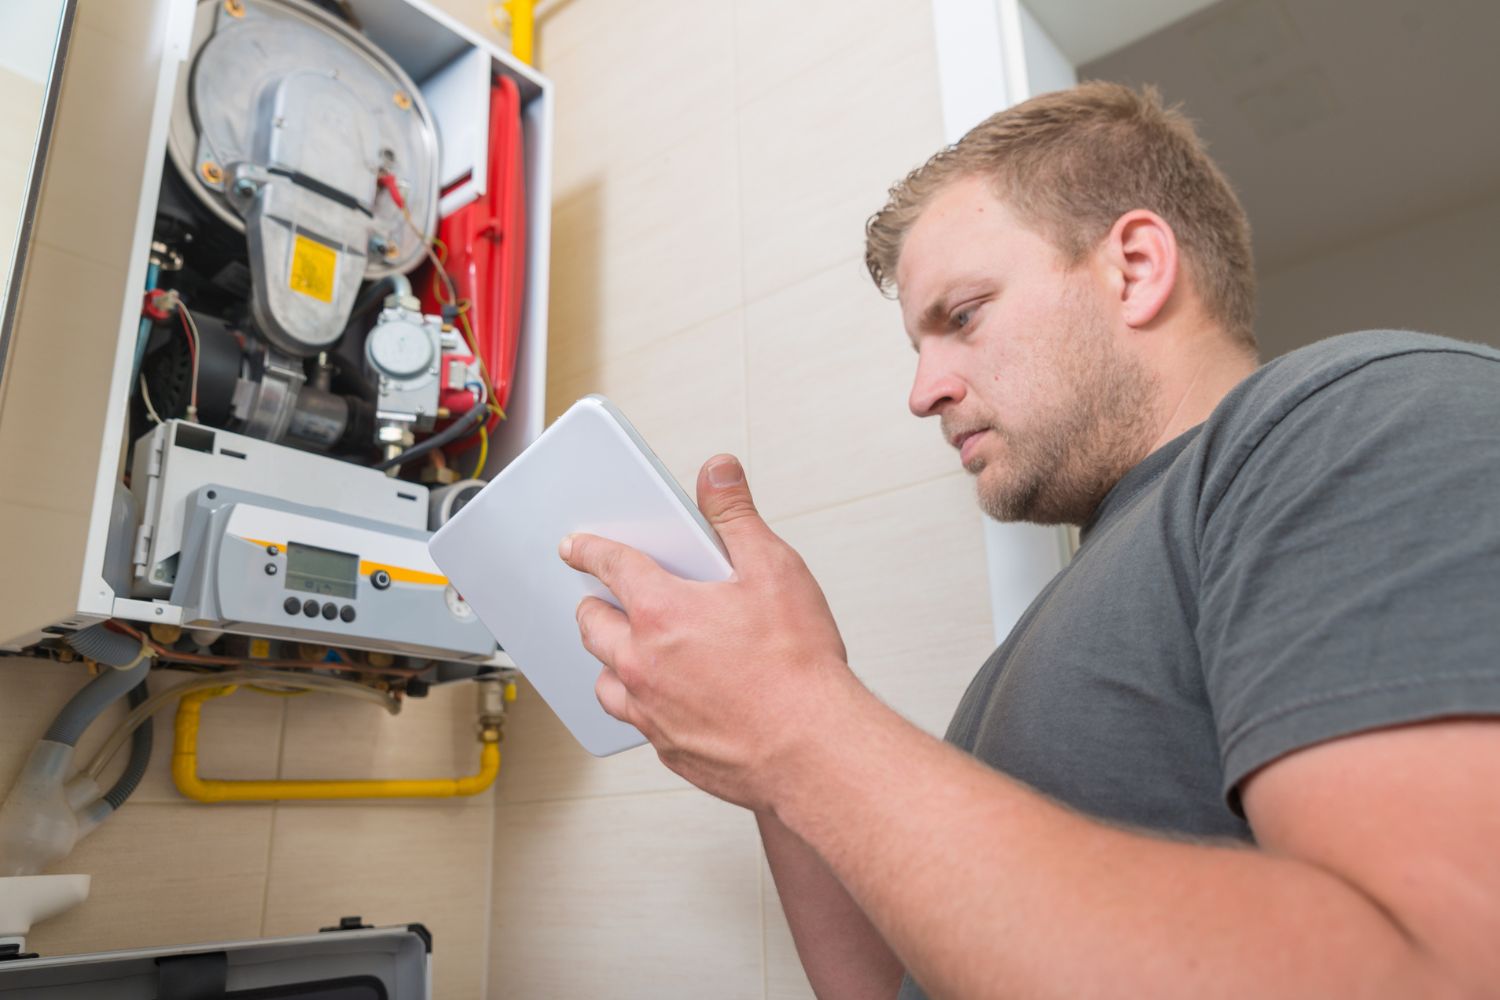 Gas Furnace Cost